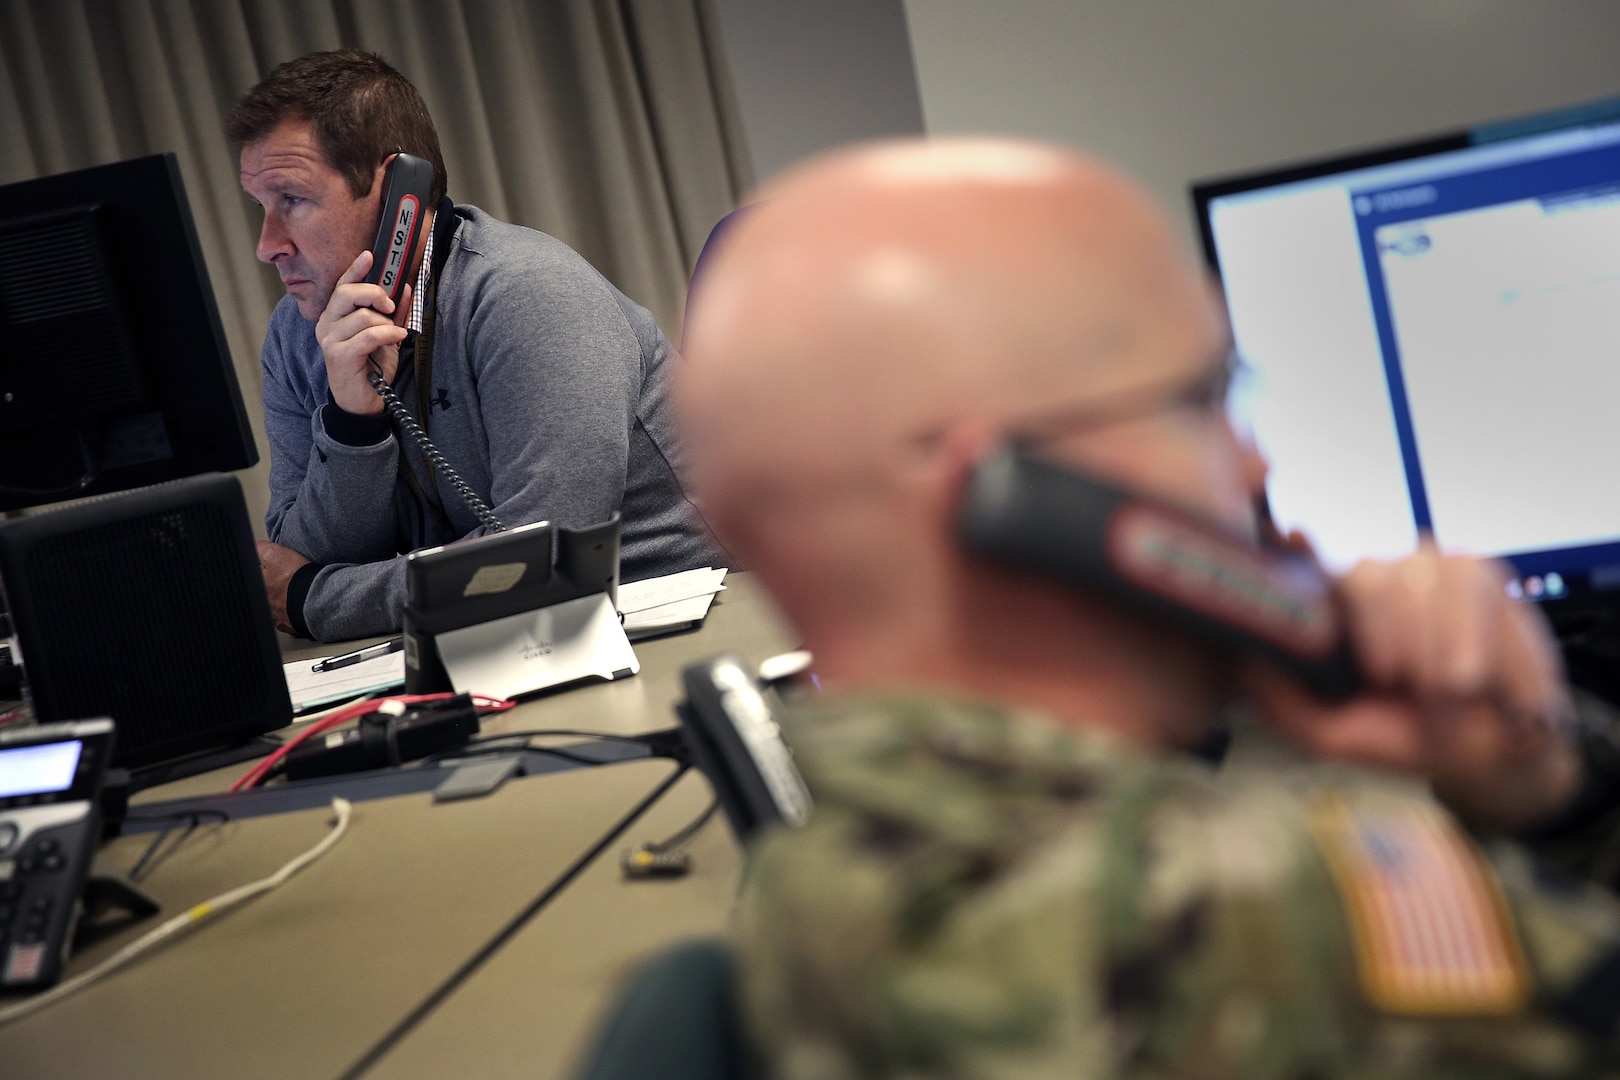 U.S. Cyber Command, Cyber National Mission Force members participate in a training and readiness exercise at Fort George G. Meade, Md., May 24, 2021.